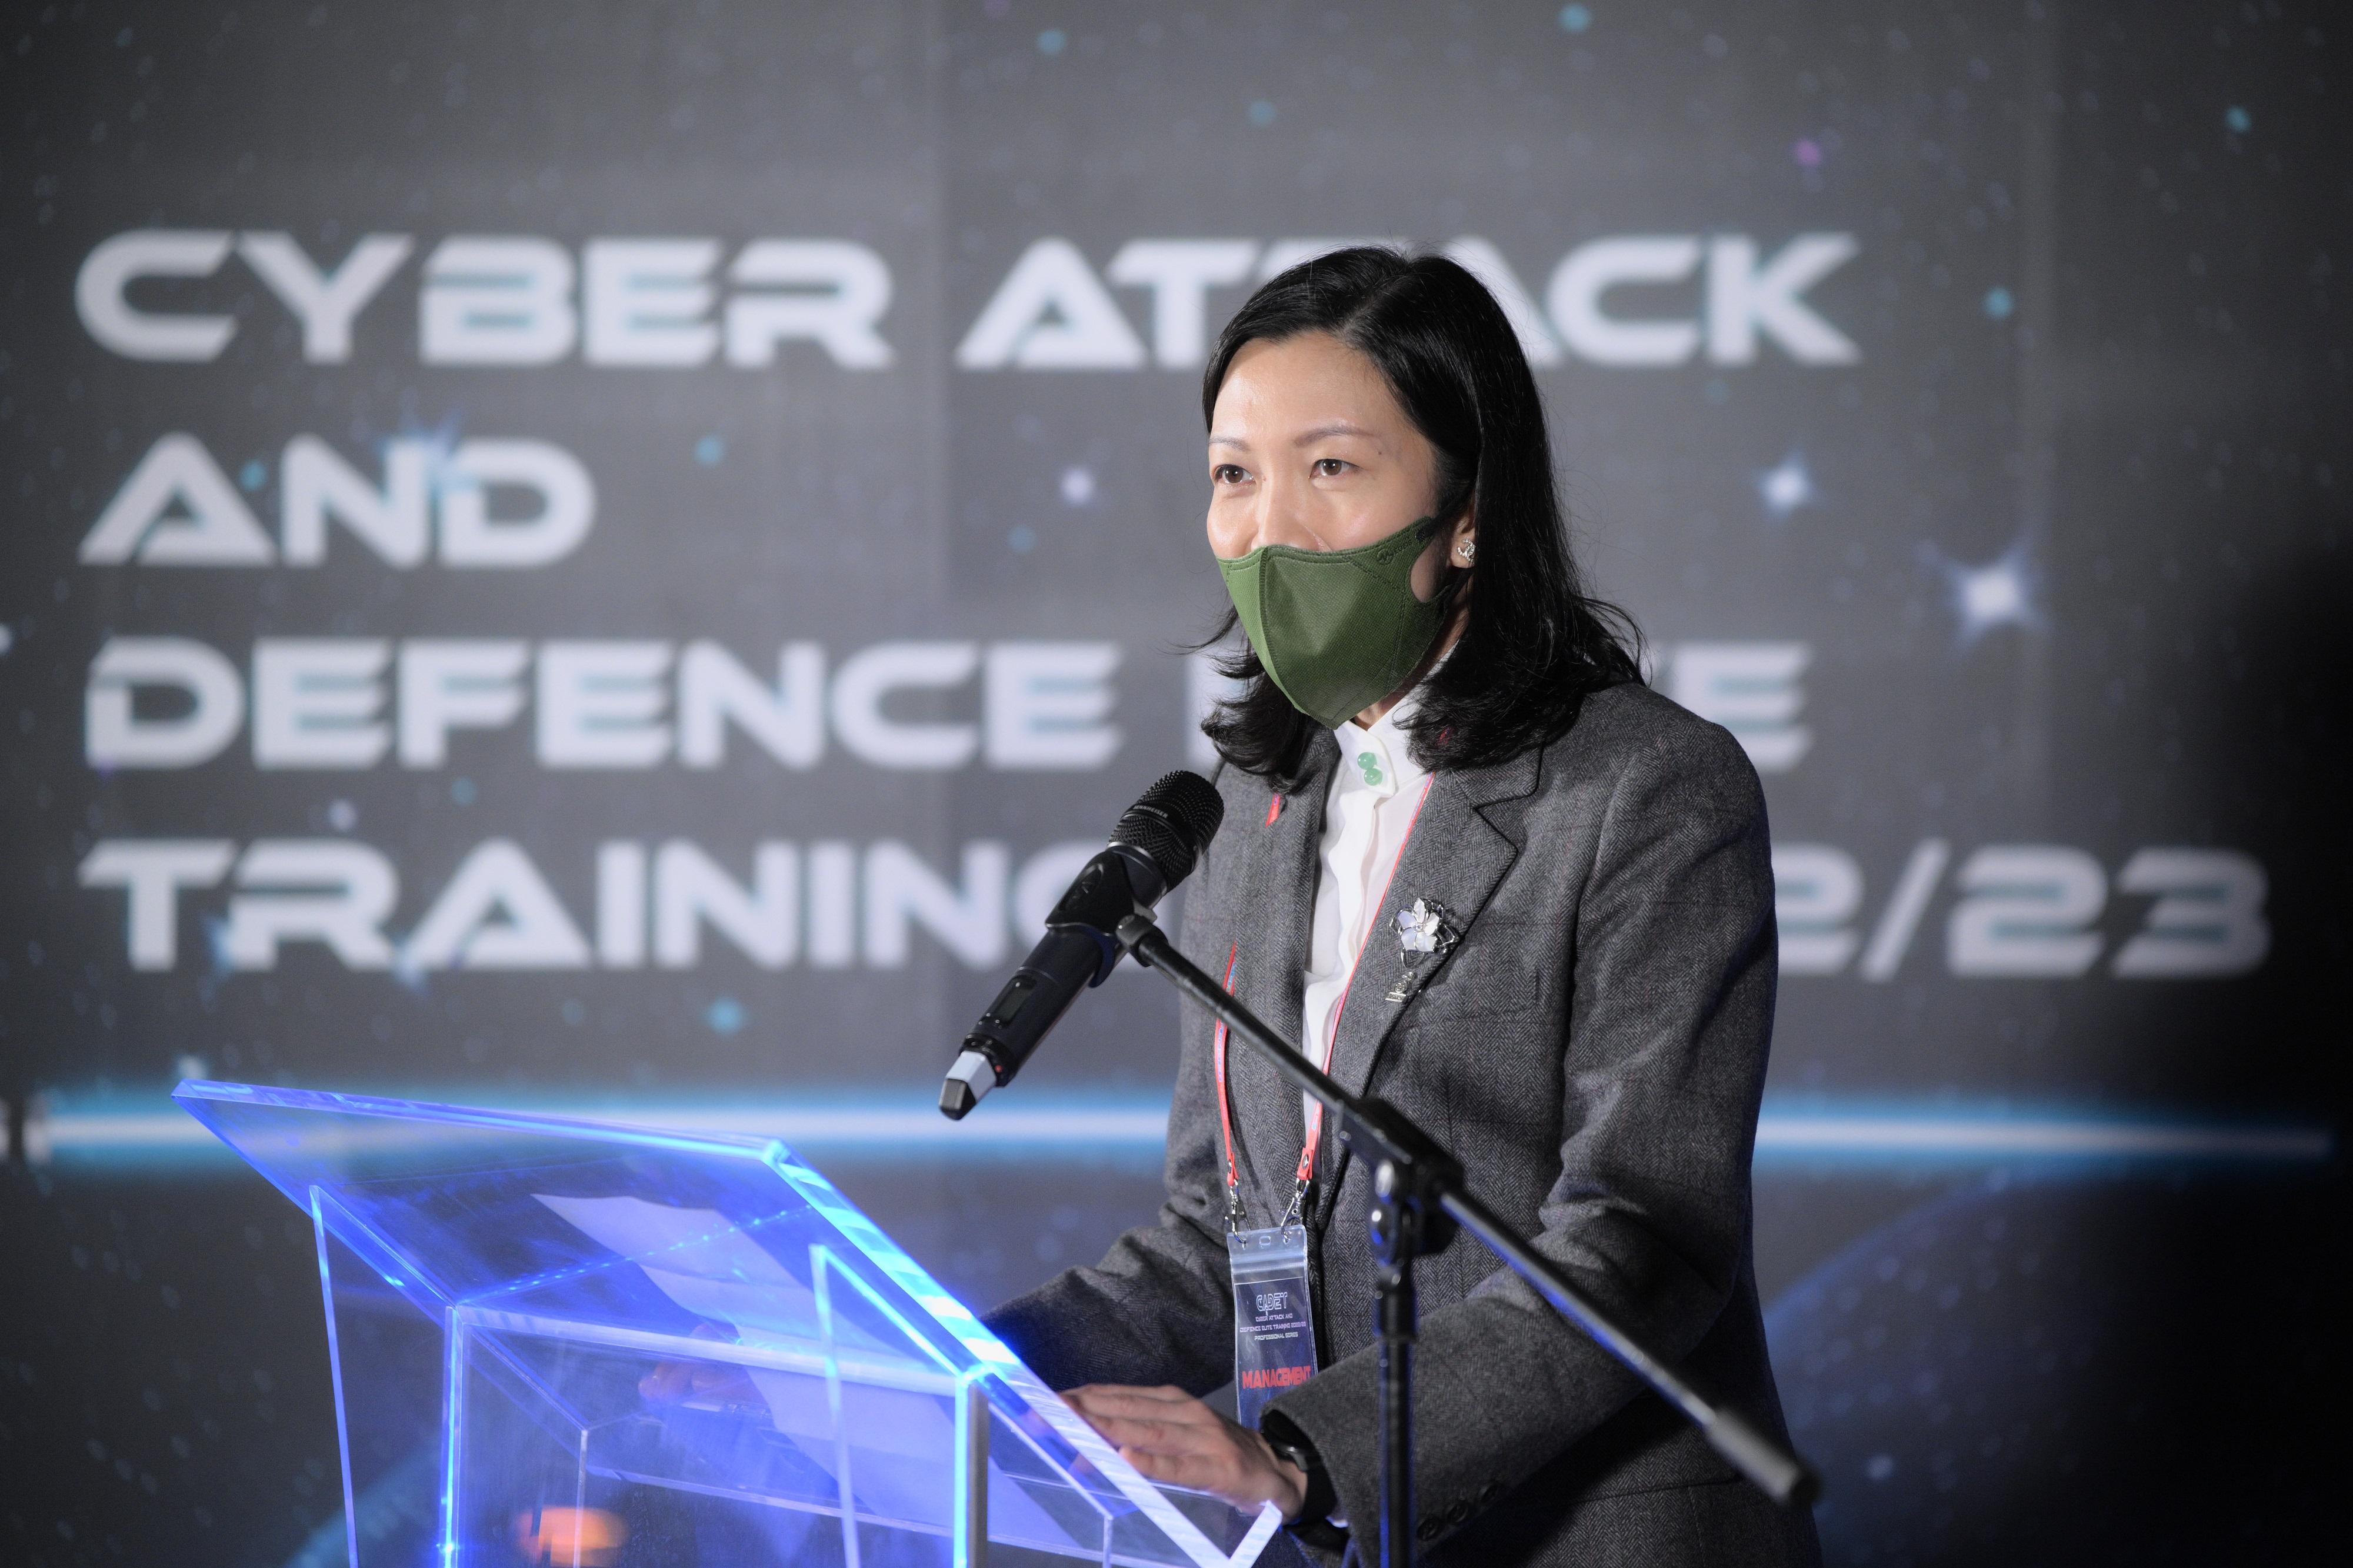 The Cyber Security and Technology Crime Bureau (CSTCB) of the Hong Kong Police Force held the "Cyber Attack and Defence Elite Training (CADET) 2022/23 – Professional Series" training course at the business solution hub DIGIBox of 3 Hong Kong today (January 6). Photo shows the Senior Vice President of Enterprise Market of Hutchison Telecommunications (Hong Kong) Limited, Ms Jess Mak, delivering opening remarks at the event.
